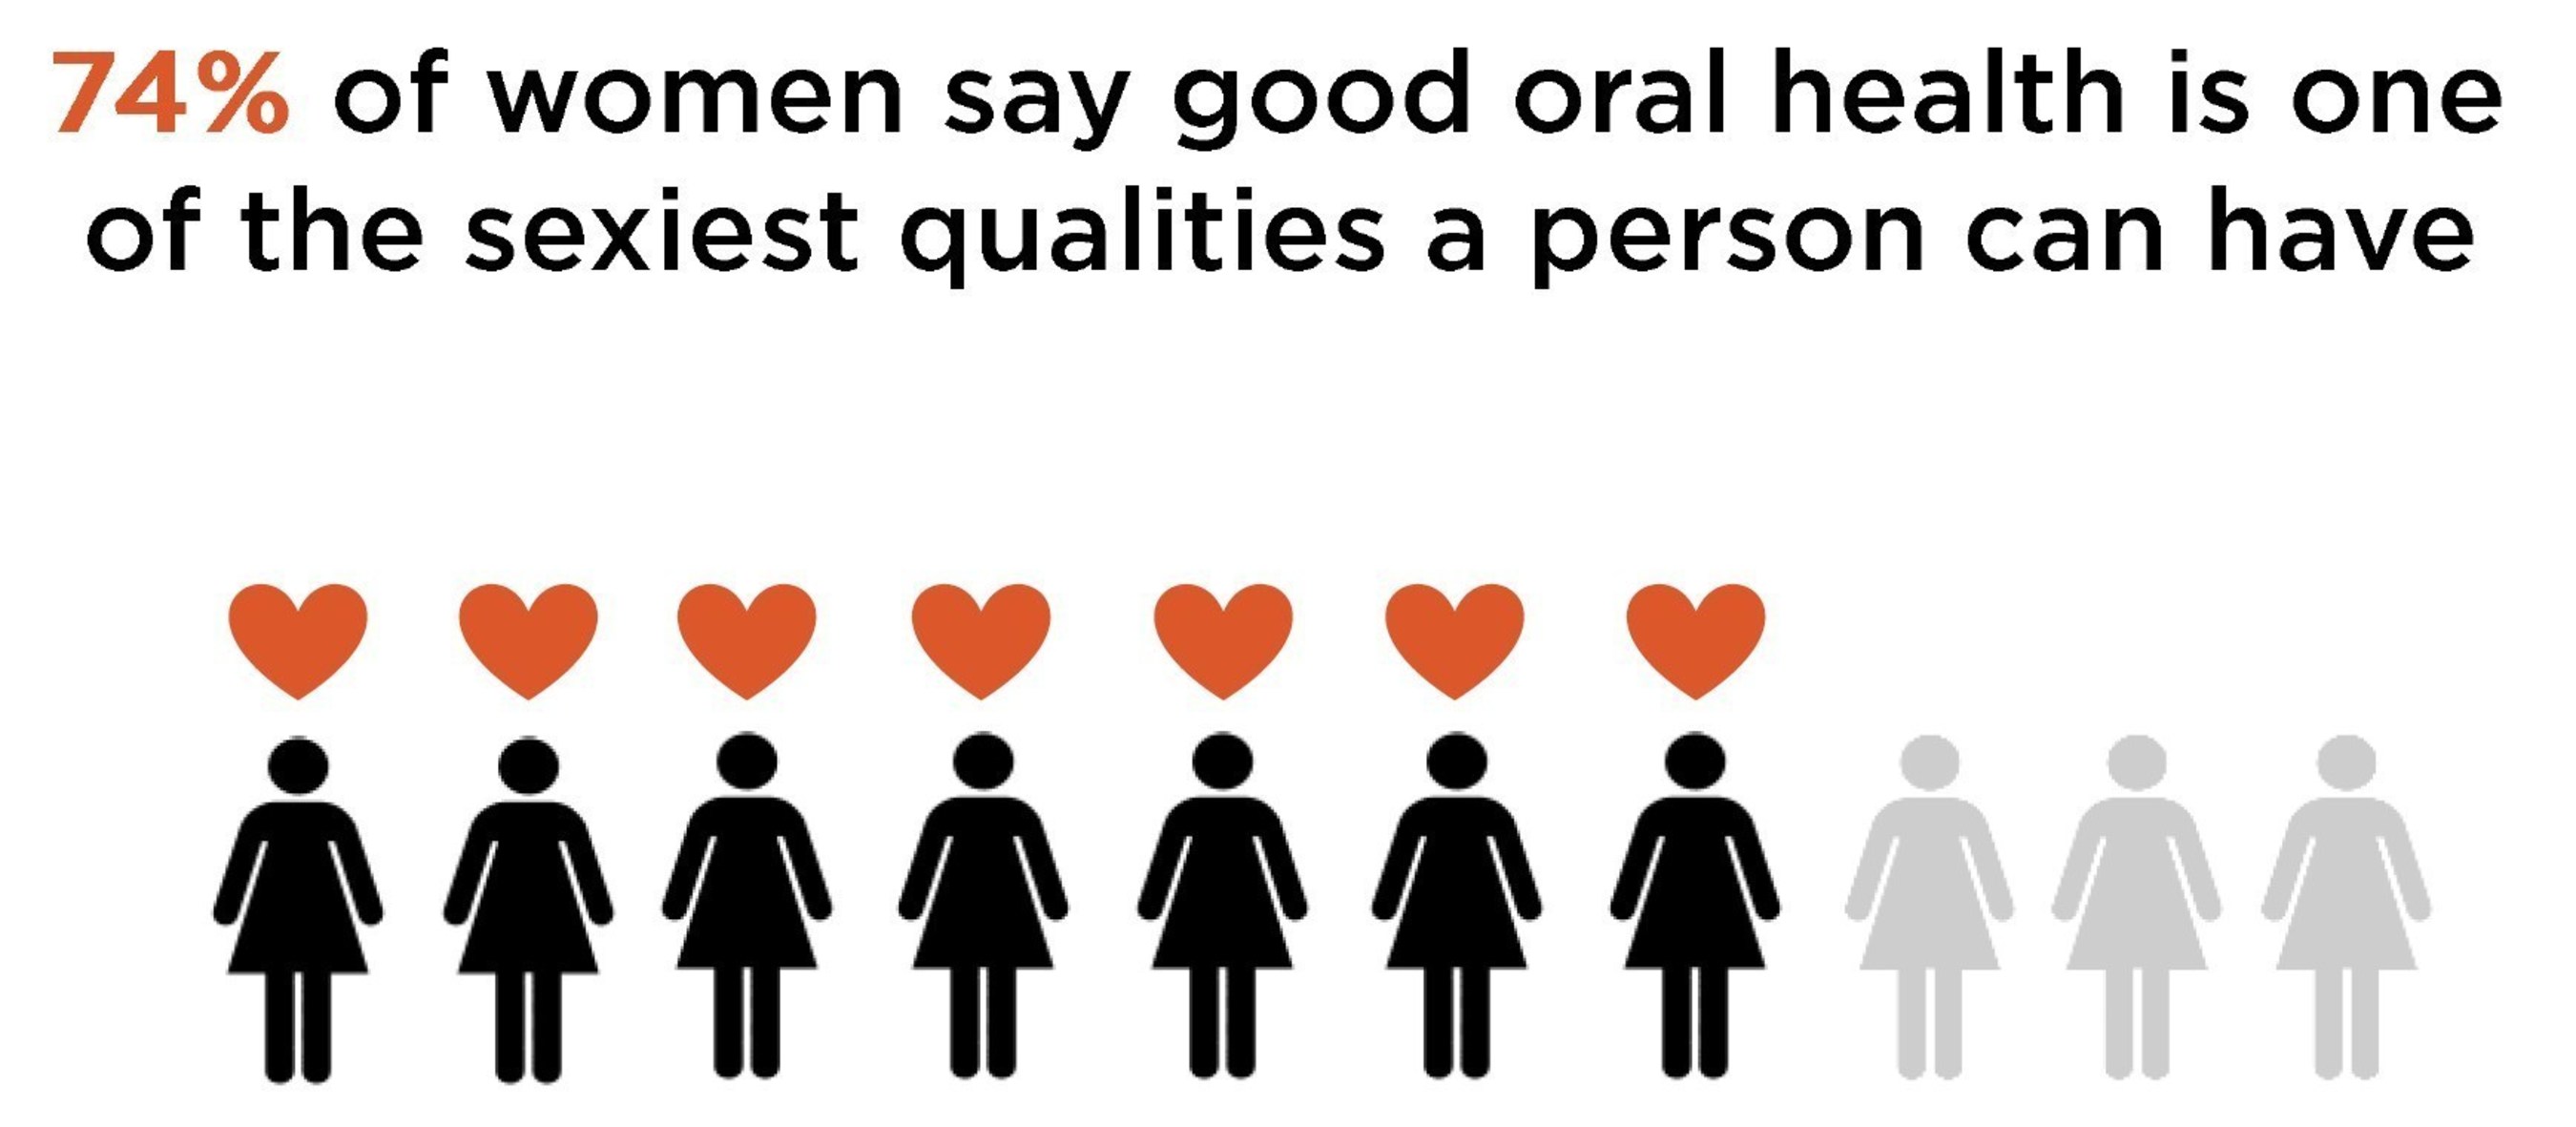 Majority of women say good oral health is sexy.